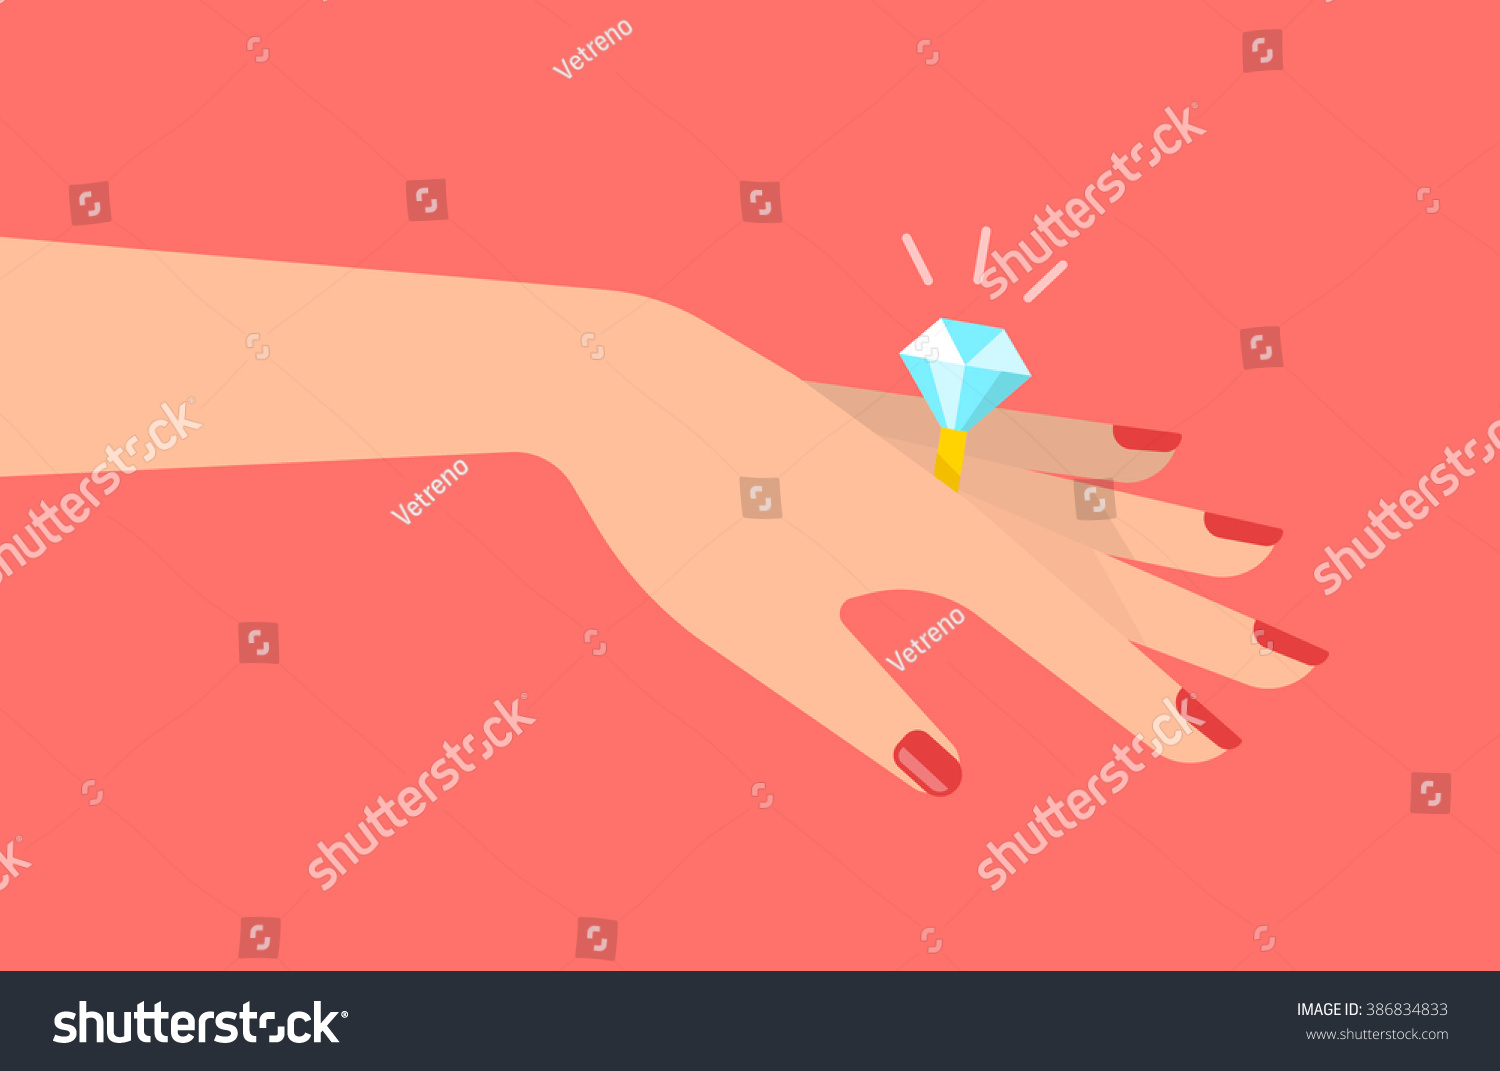 SVG of Graceful women's hand with a beautiful ring with a big shining diamond. A marriage proposal and wedding concept. Isolated vector illustration flat design. svg